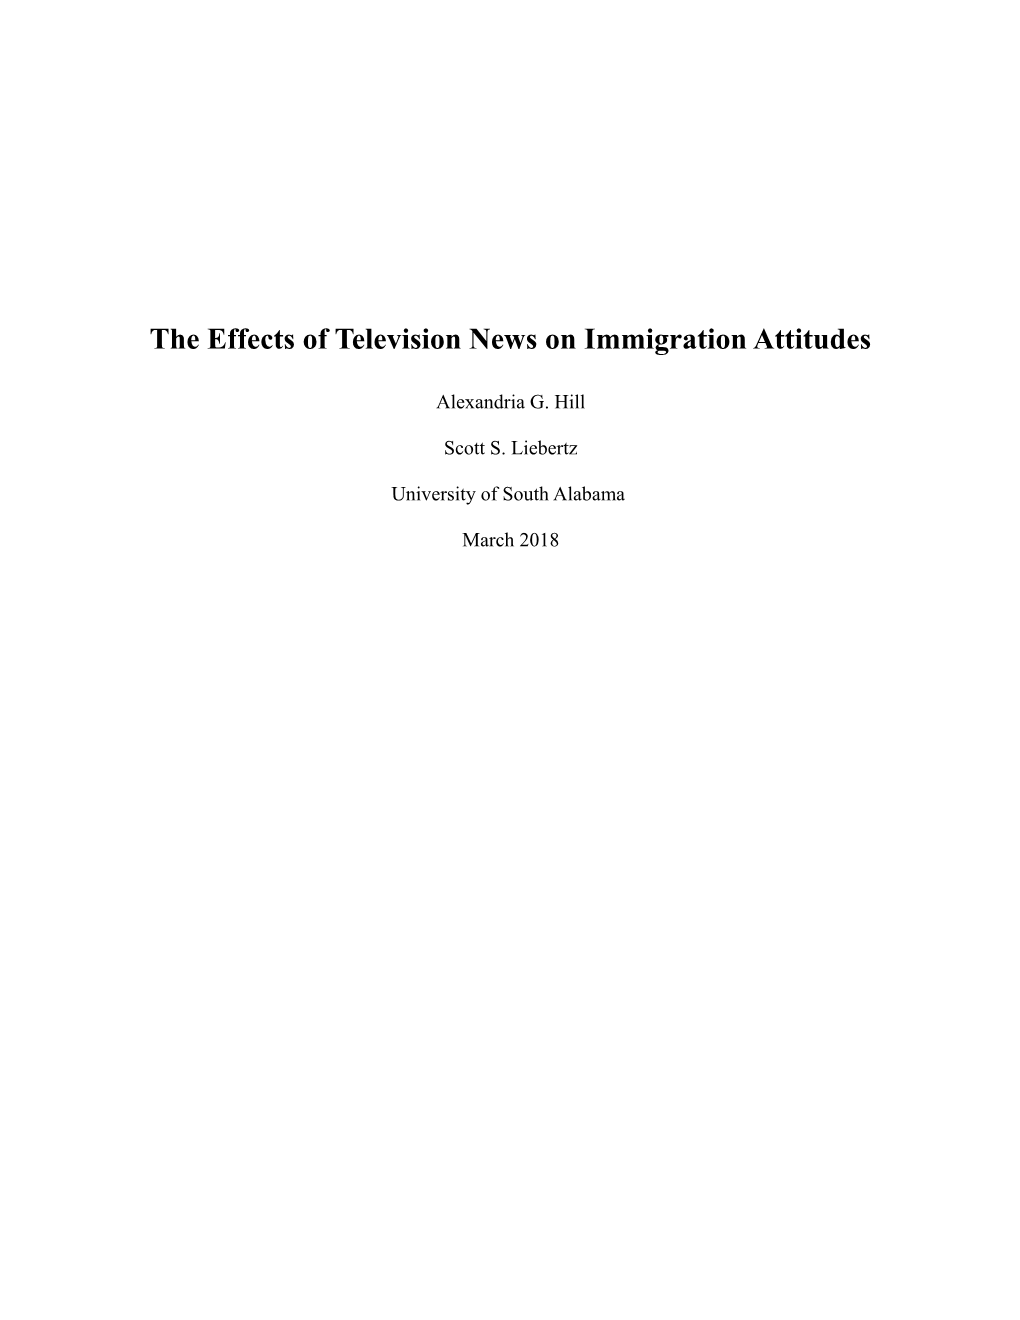 The Effects of Television News on Immigration Attitudes